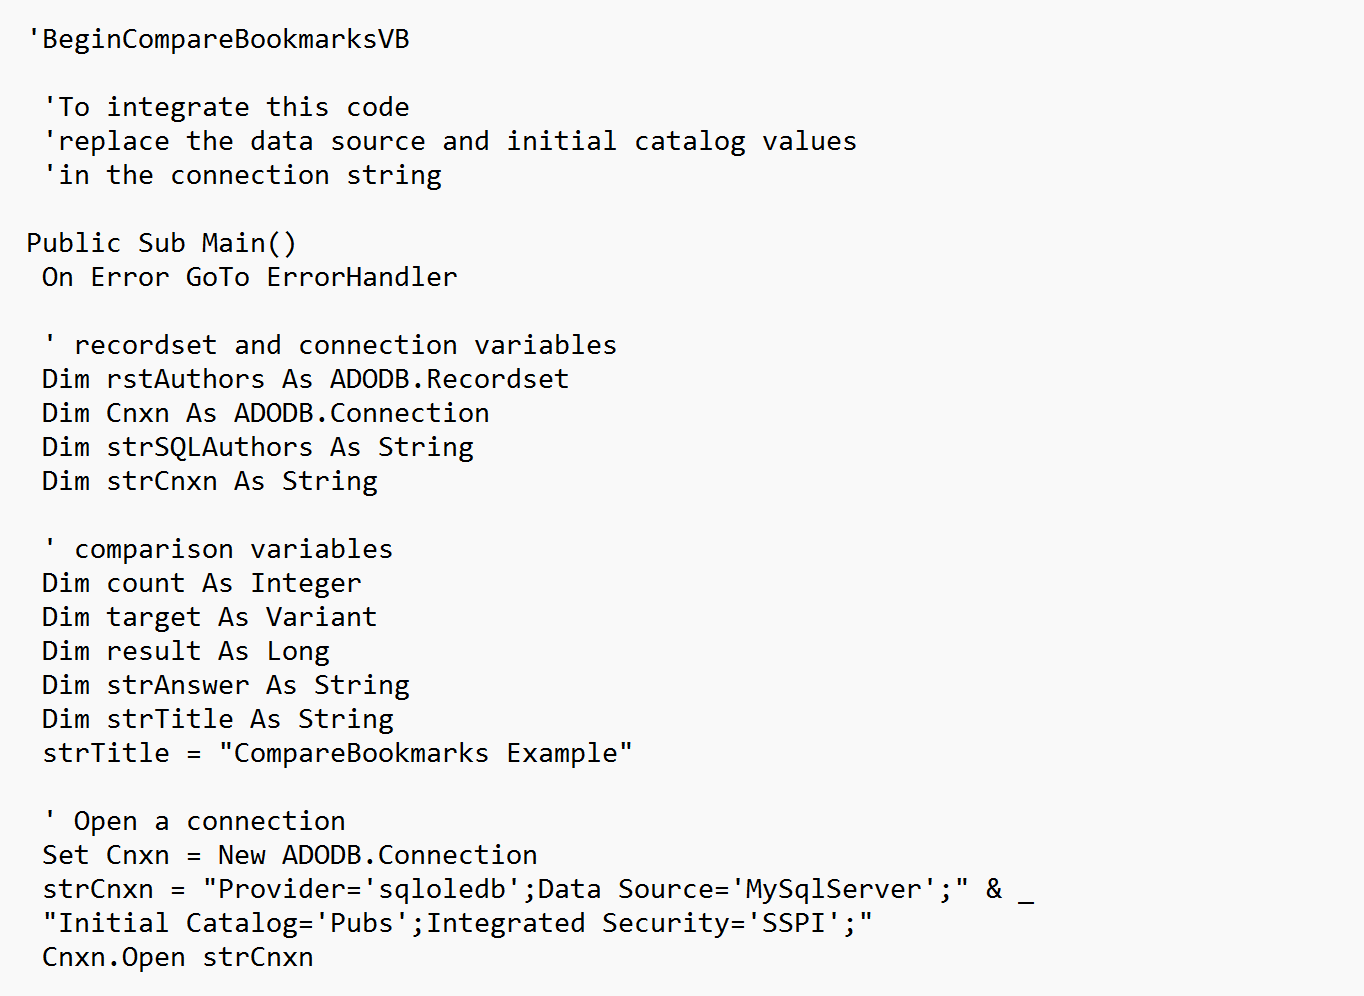 VB6 sample before migrating to C# with ChatrGPT